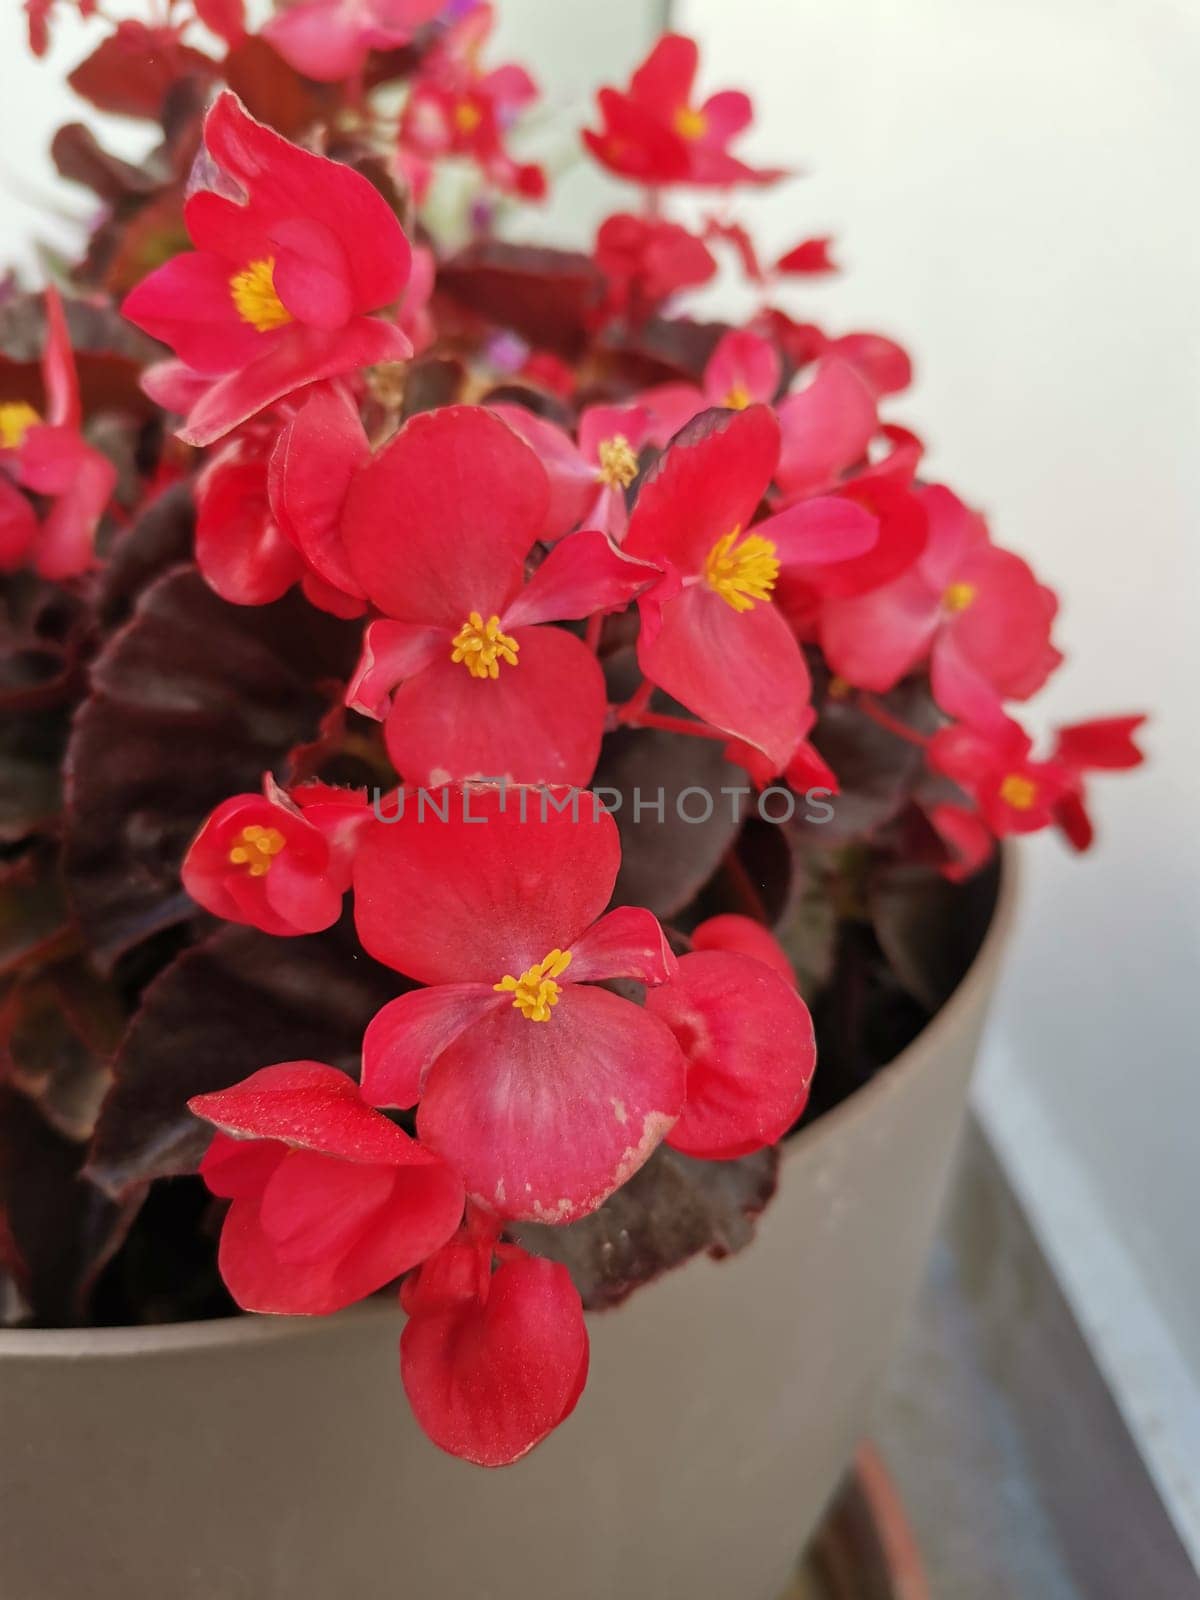 Houseplant begonia blooming with coral flowers, by Fran71